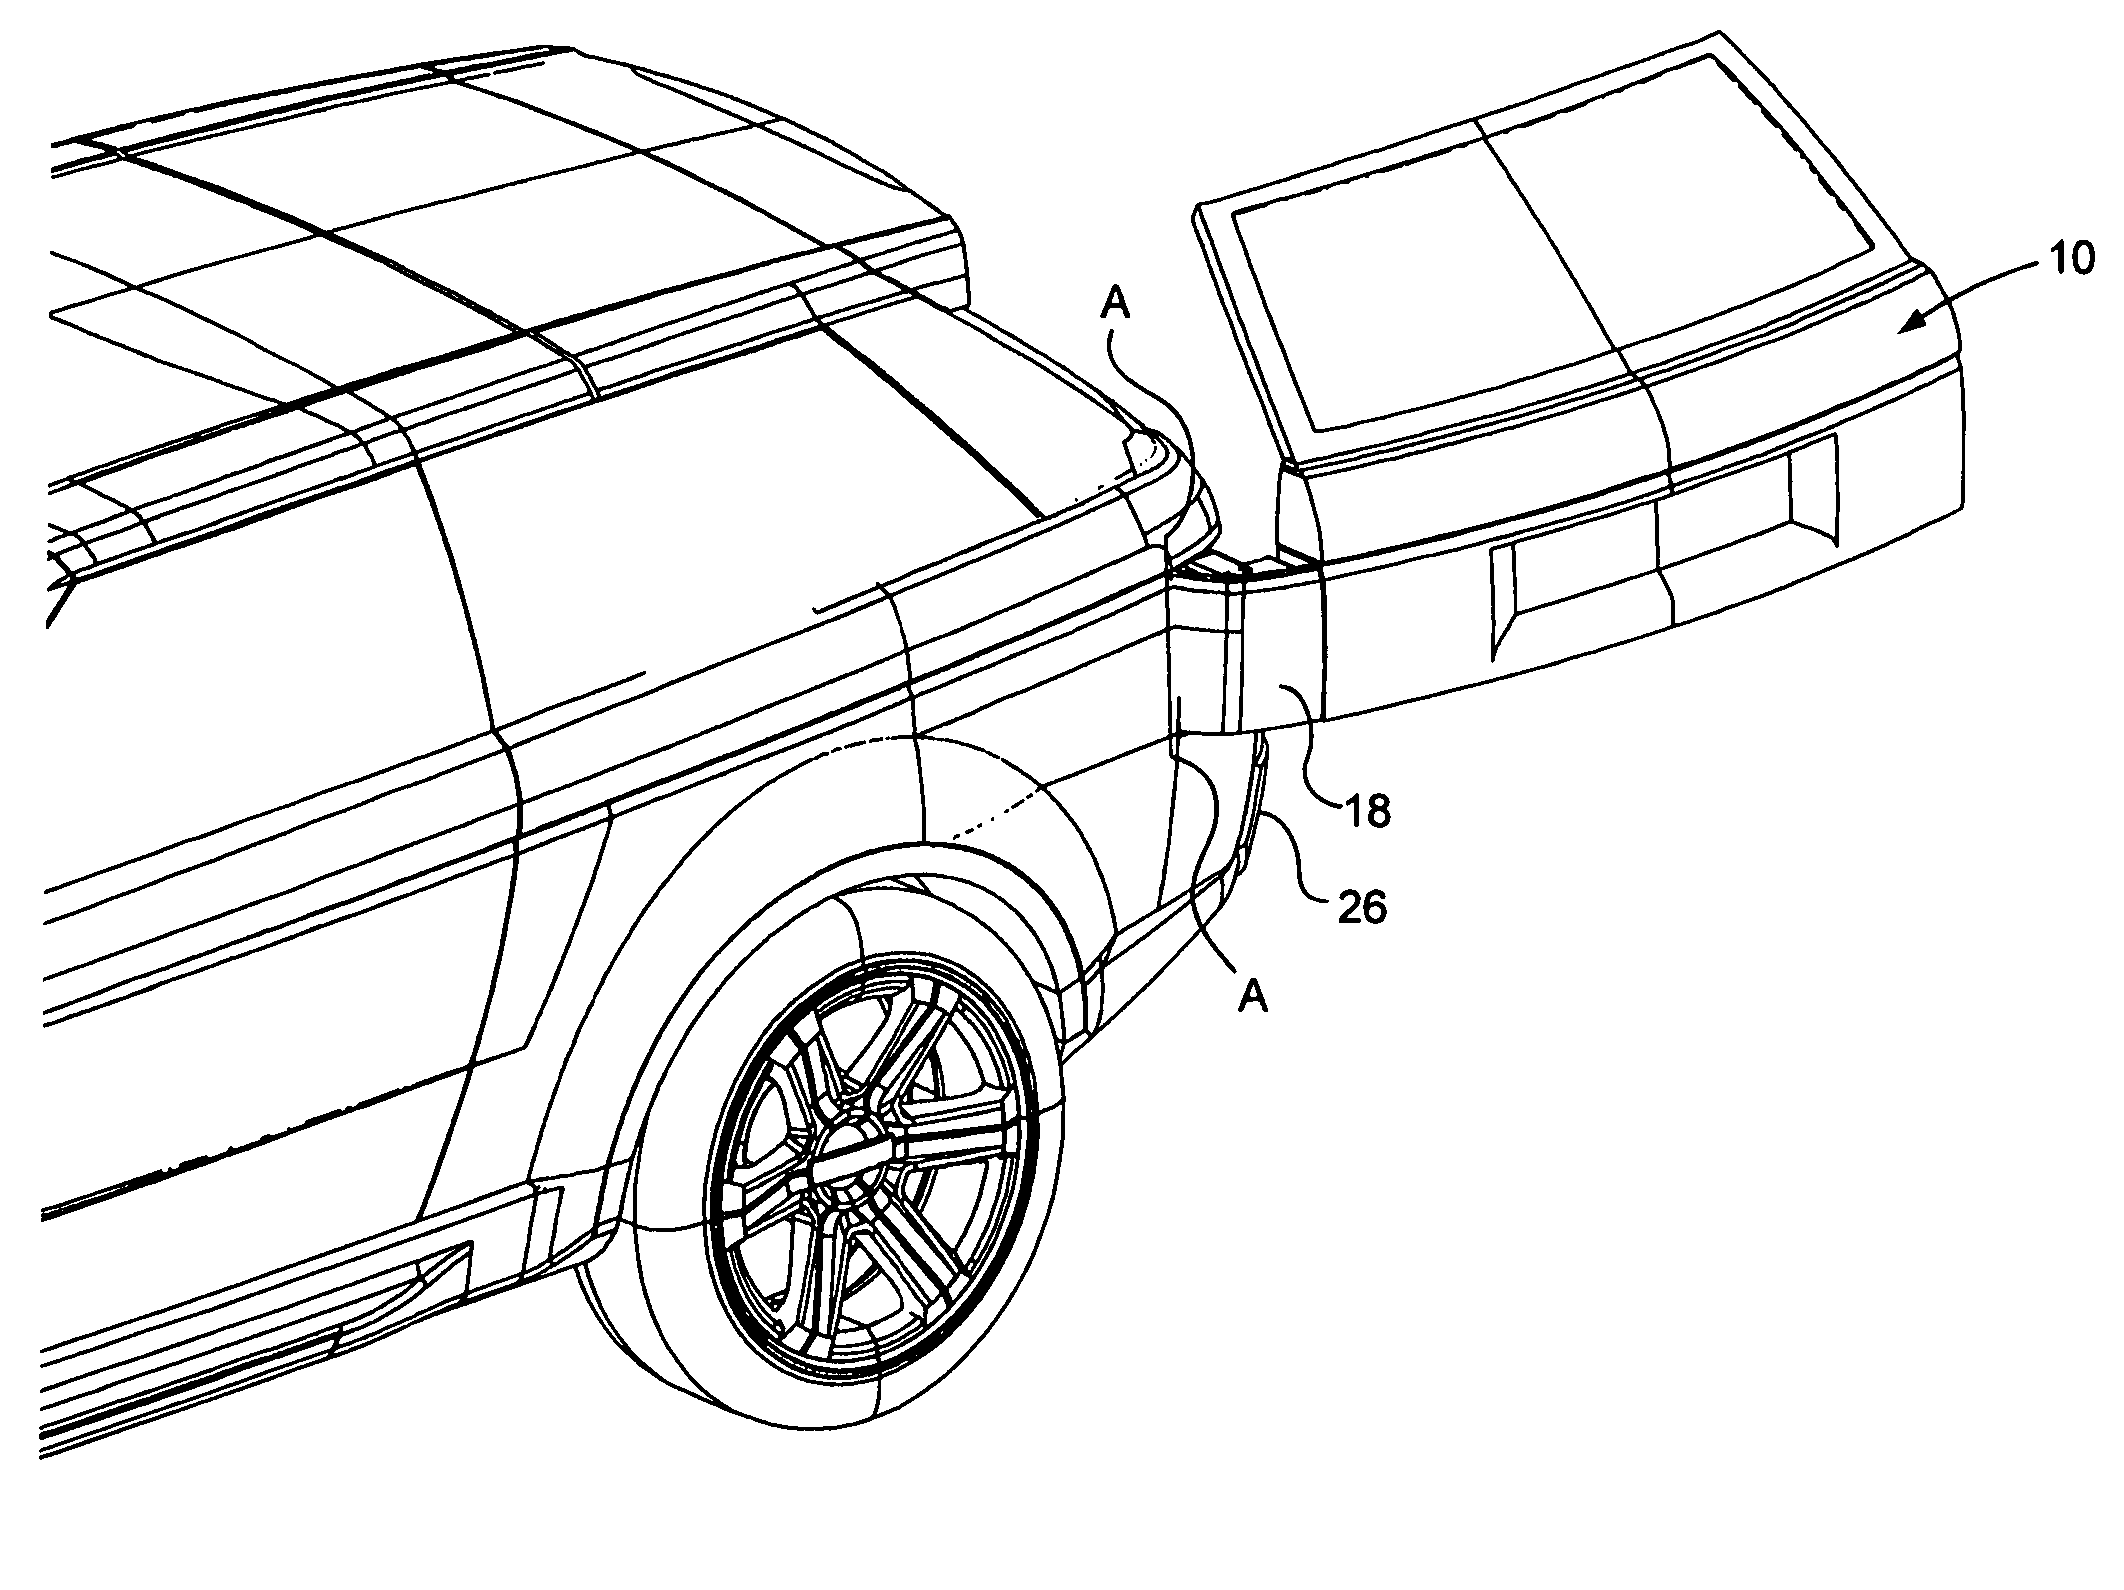 Vehicle with horizontally-pivotable tail gate